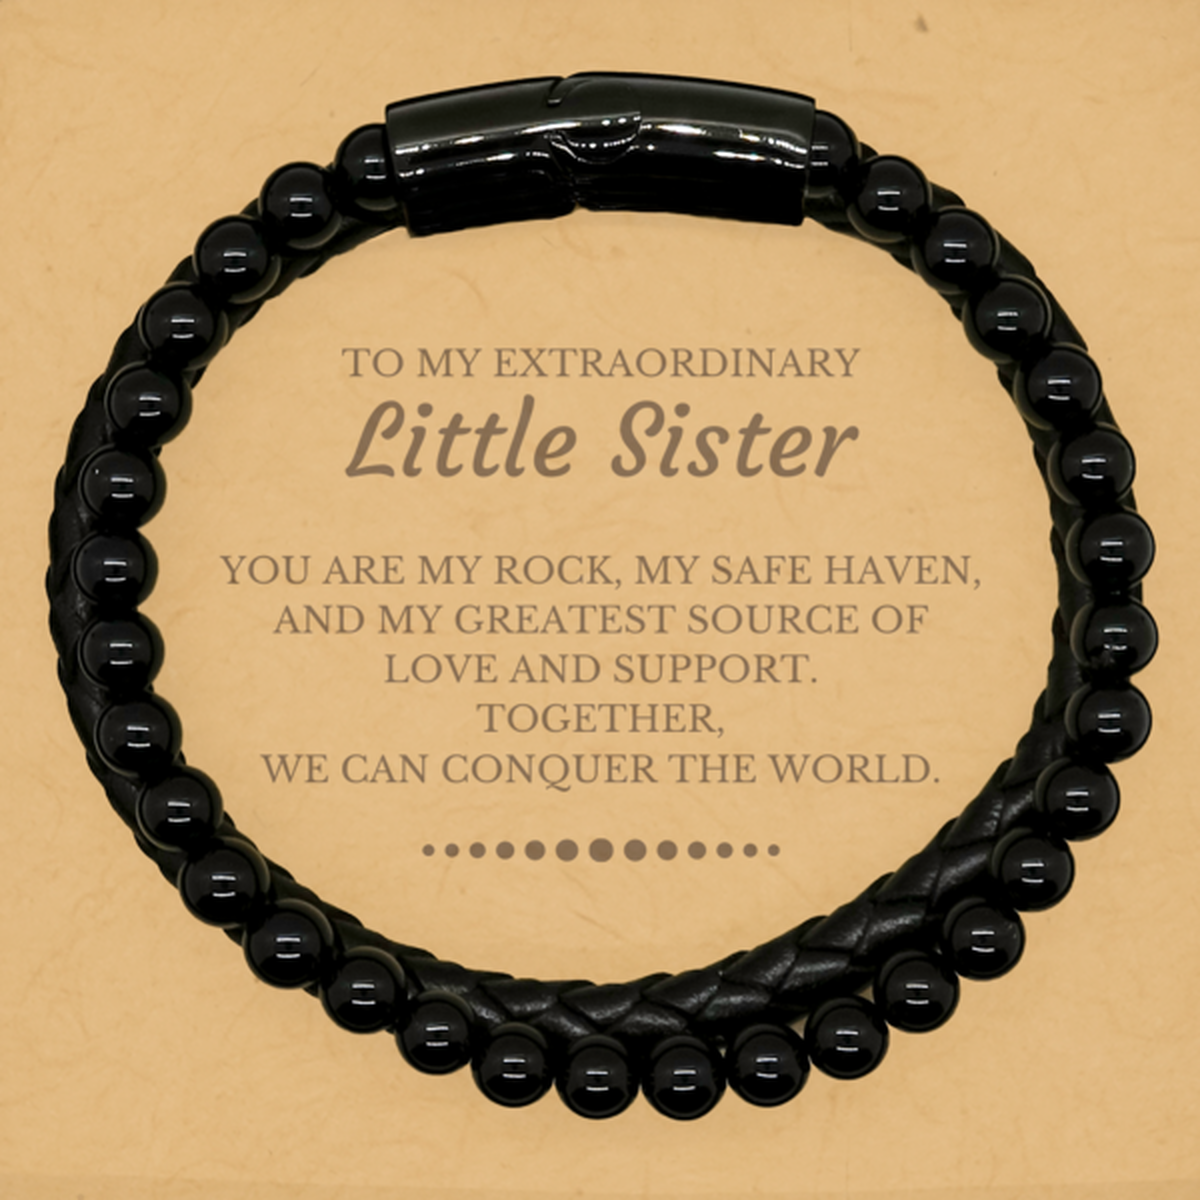 To My Extraordinary Little Sister Gifts, Together, we can conquer the world, Birthday Stone Leather Bracelets For Little Sister, Christmas Gifts For Little Sister